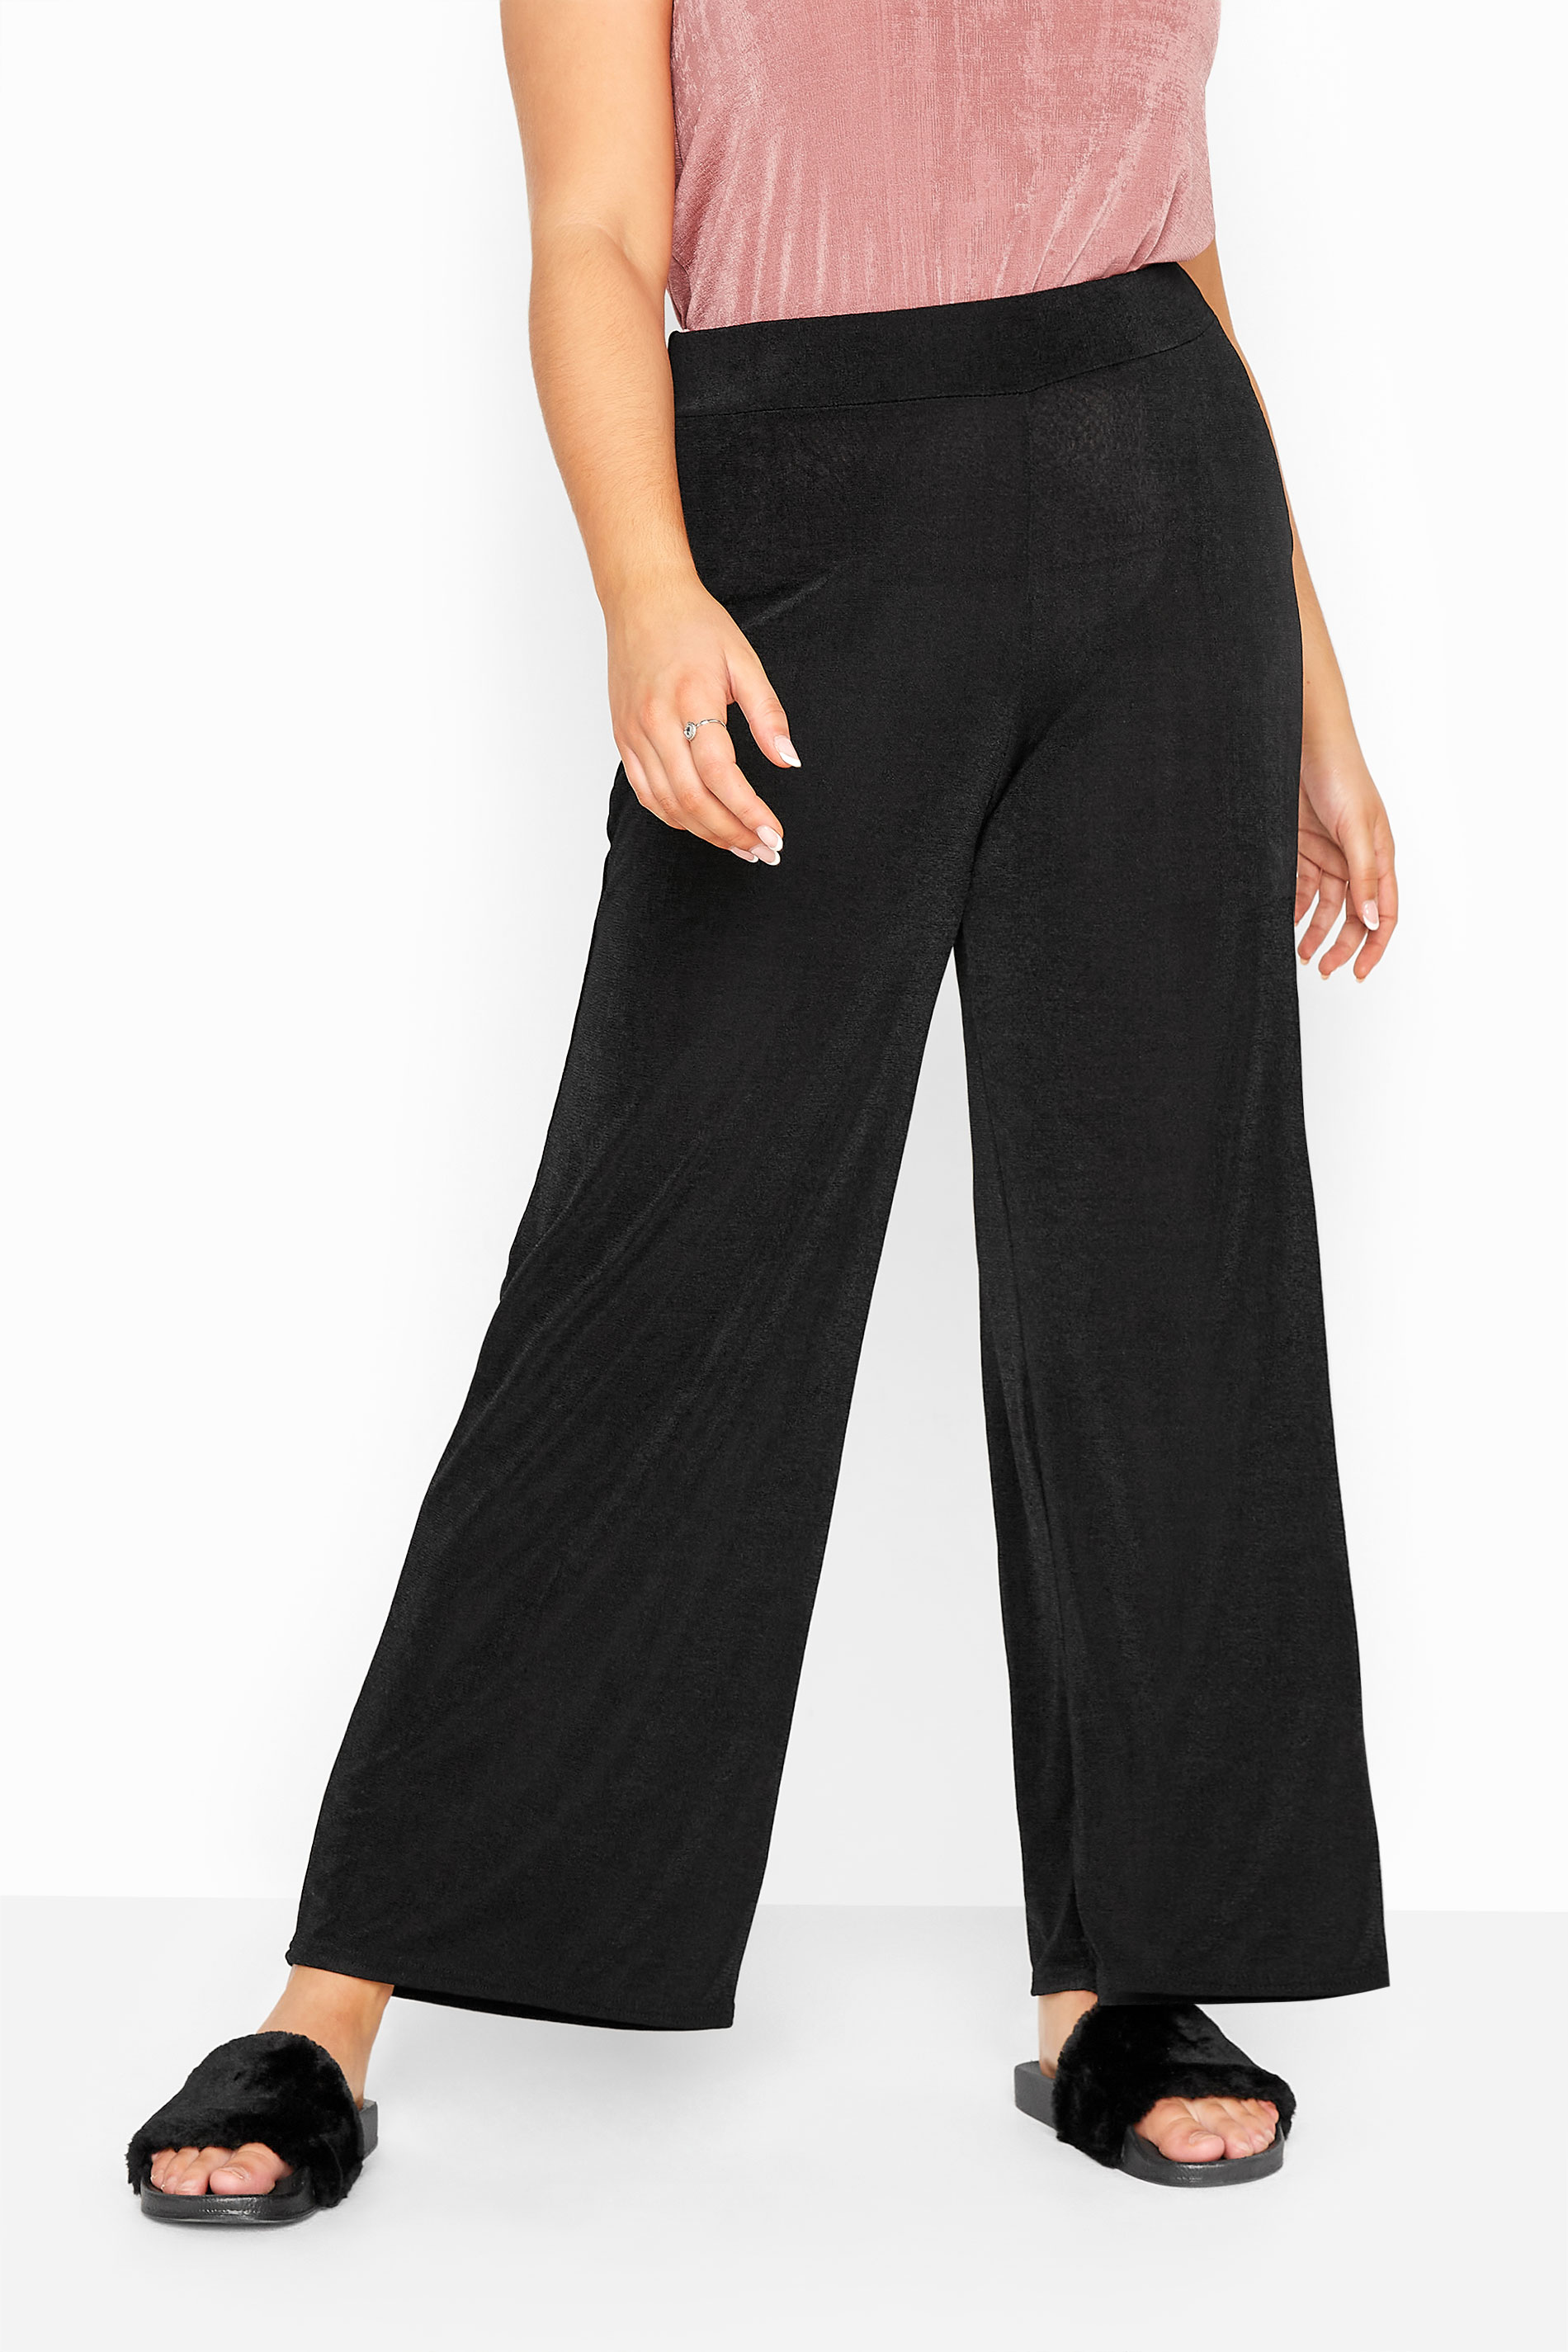 YOURS LONDON Black Slinky Co-ord Wide Leg Trousers | Yours Clothing